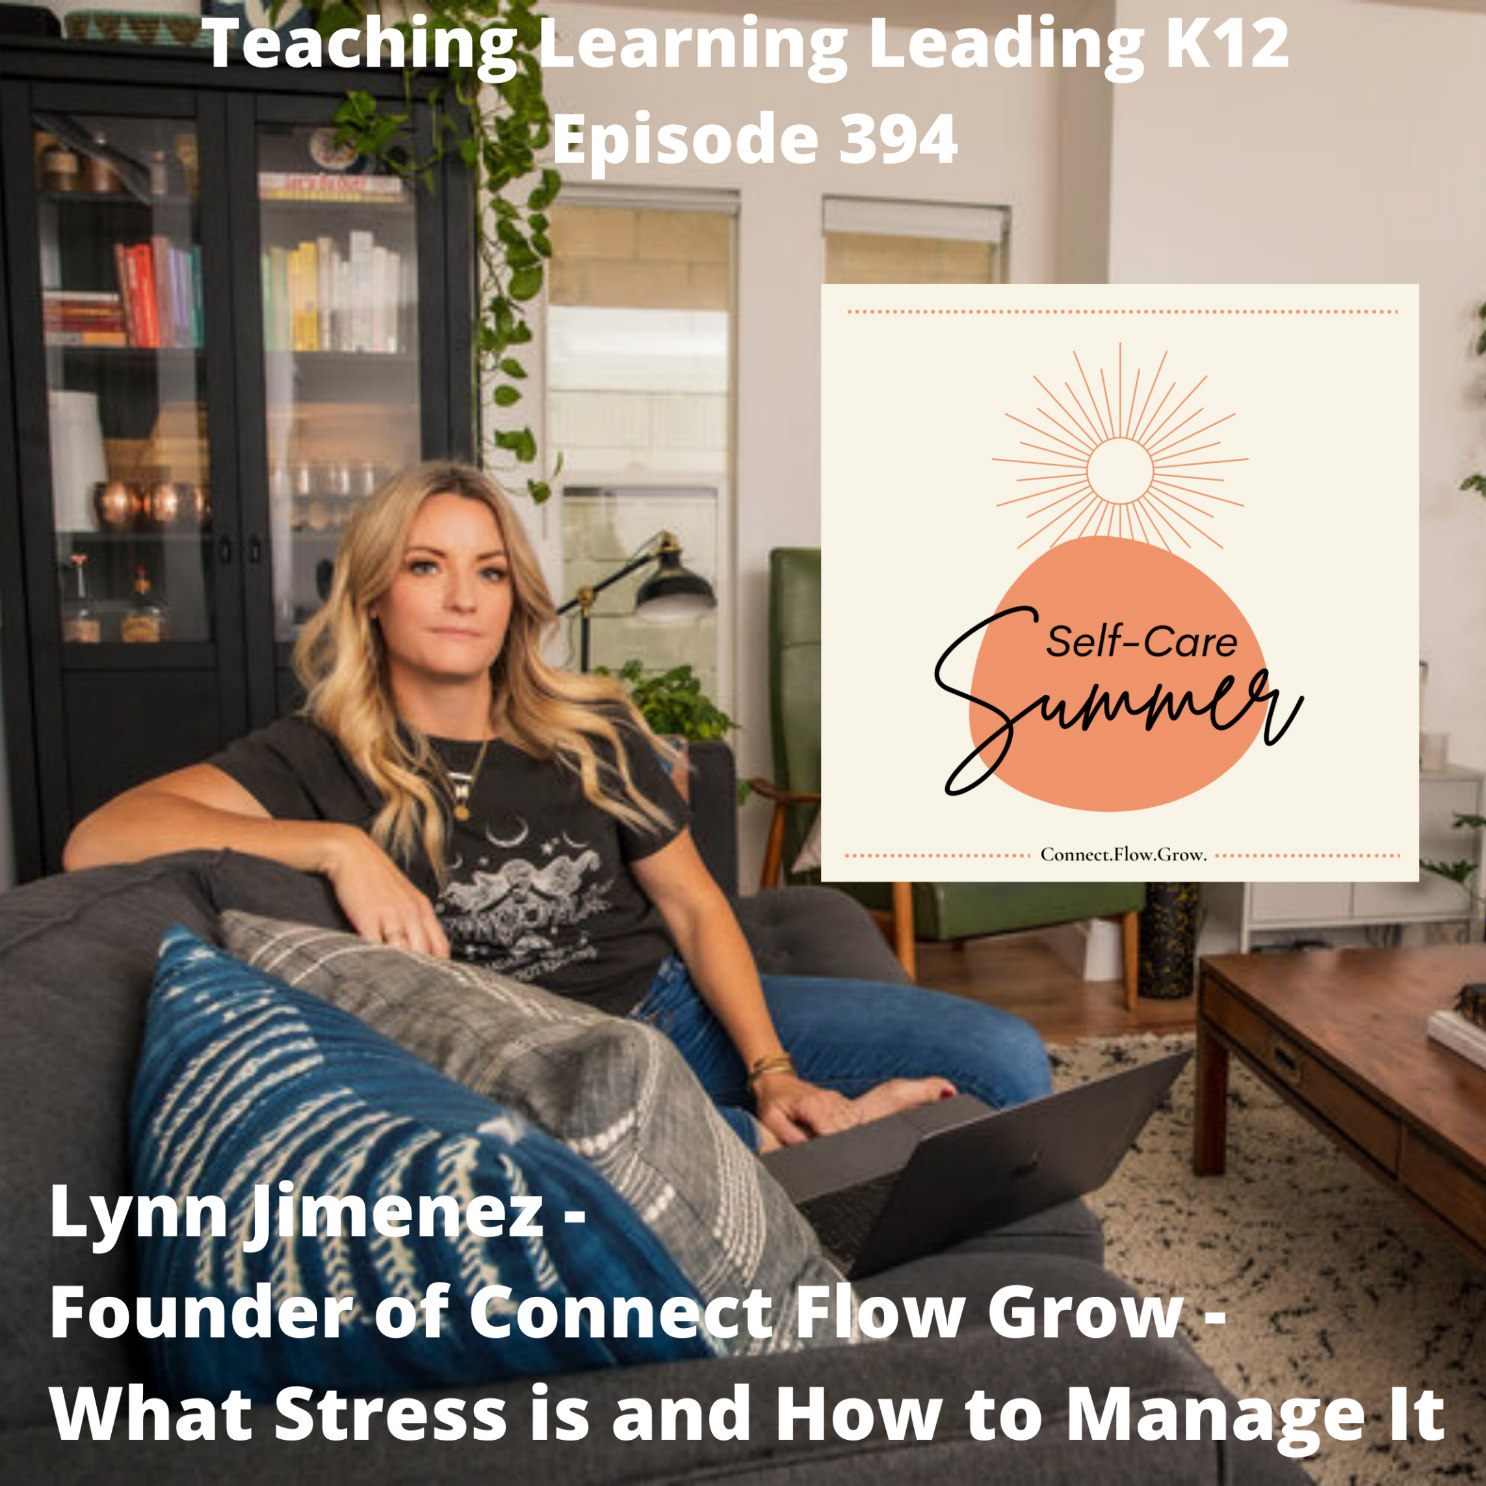 Lynn Jimenez - Founder of Connect Flow Grow - What Stress Is and How to Manage It - 394 Image